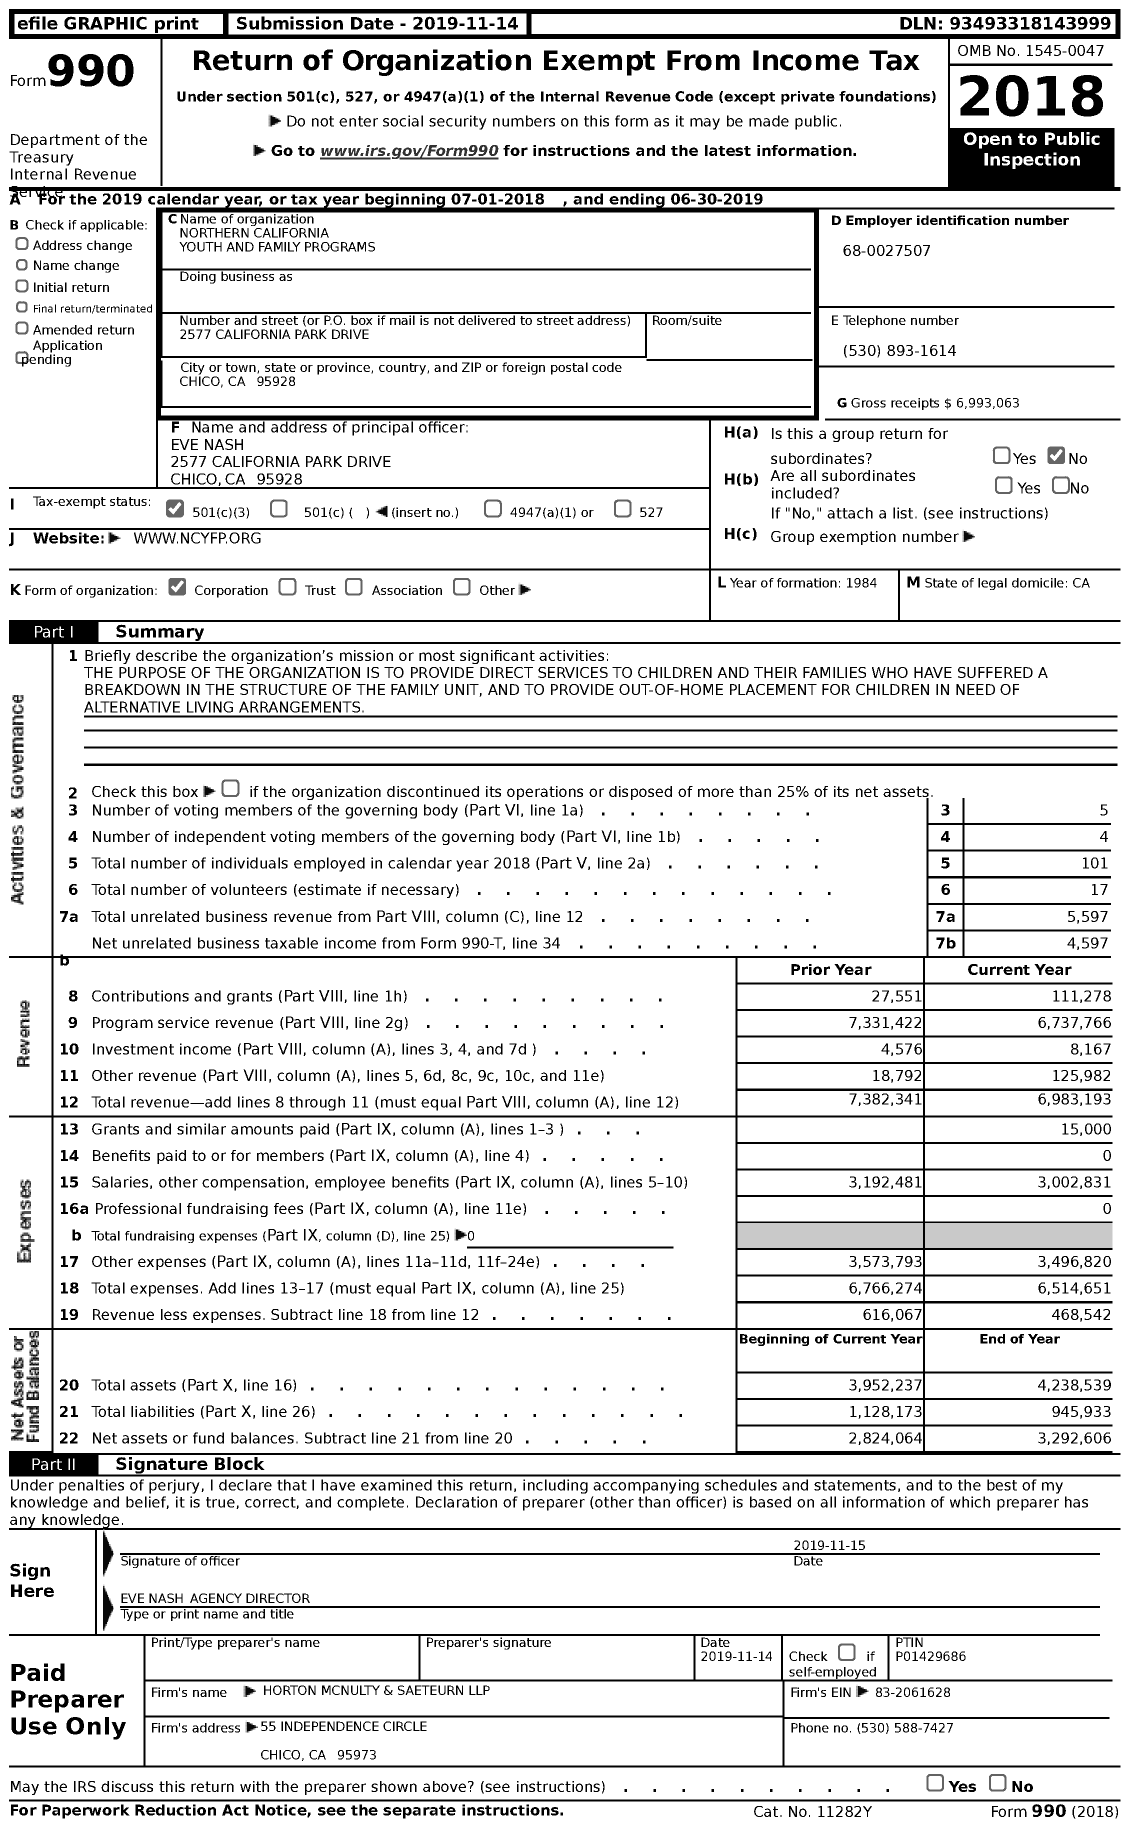 Image of first page of 2018 Form 990 for Youth and Family Programs